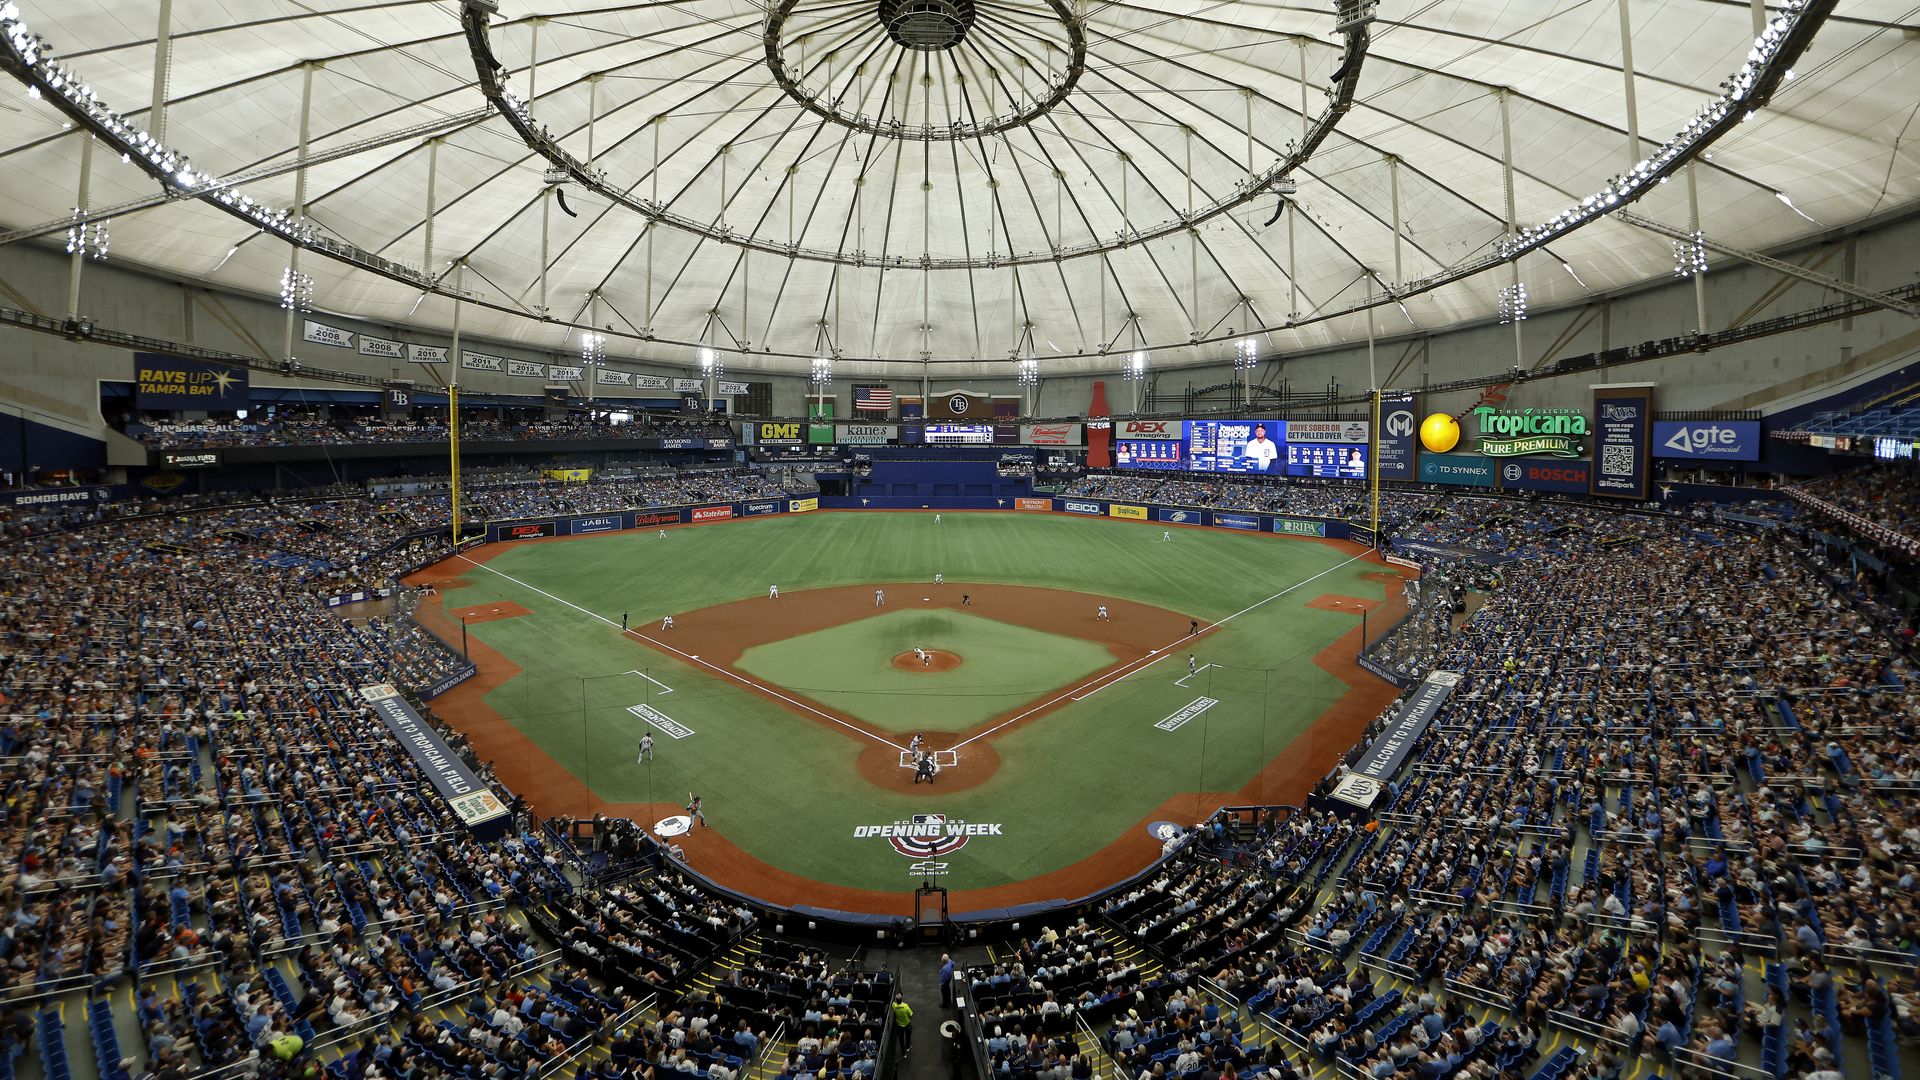 ST PETERSBURG, FLORIDA - MARCH 30: A general view during a game between the Tampa Bay Rays and the Detroit Tigers on Opening Day at Tropicana Field on March 30, 2023 in St Petersburg, Florida. 